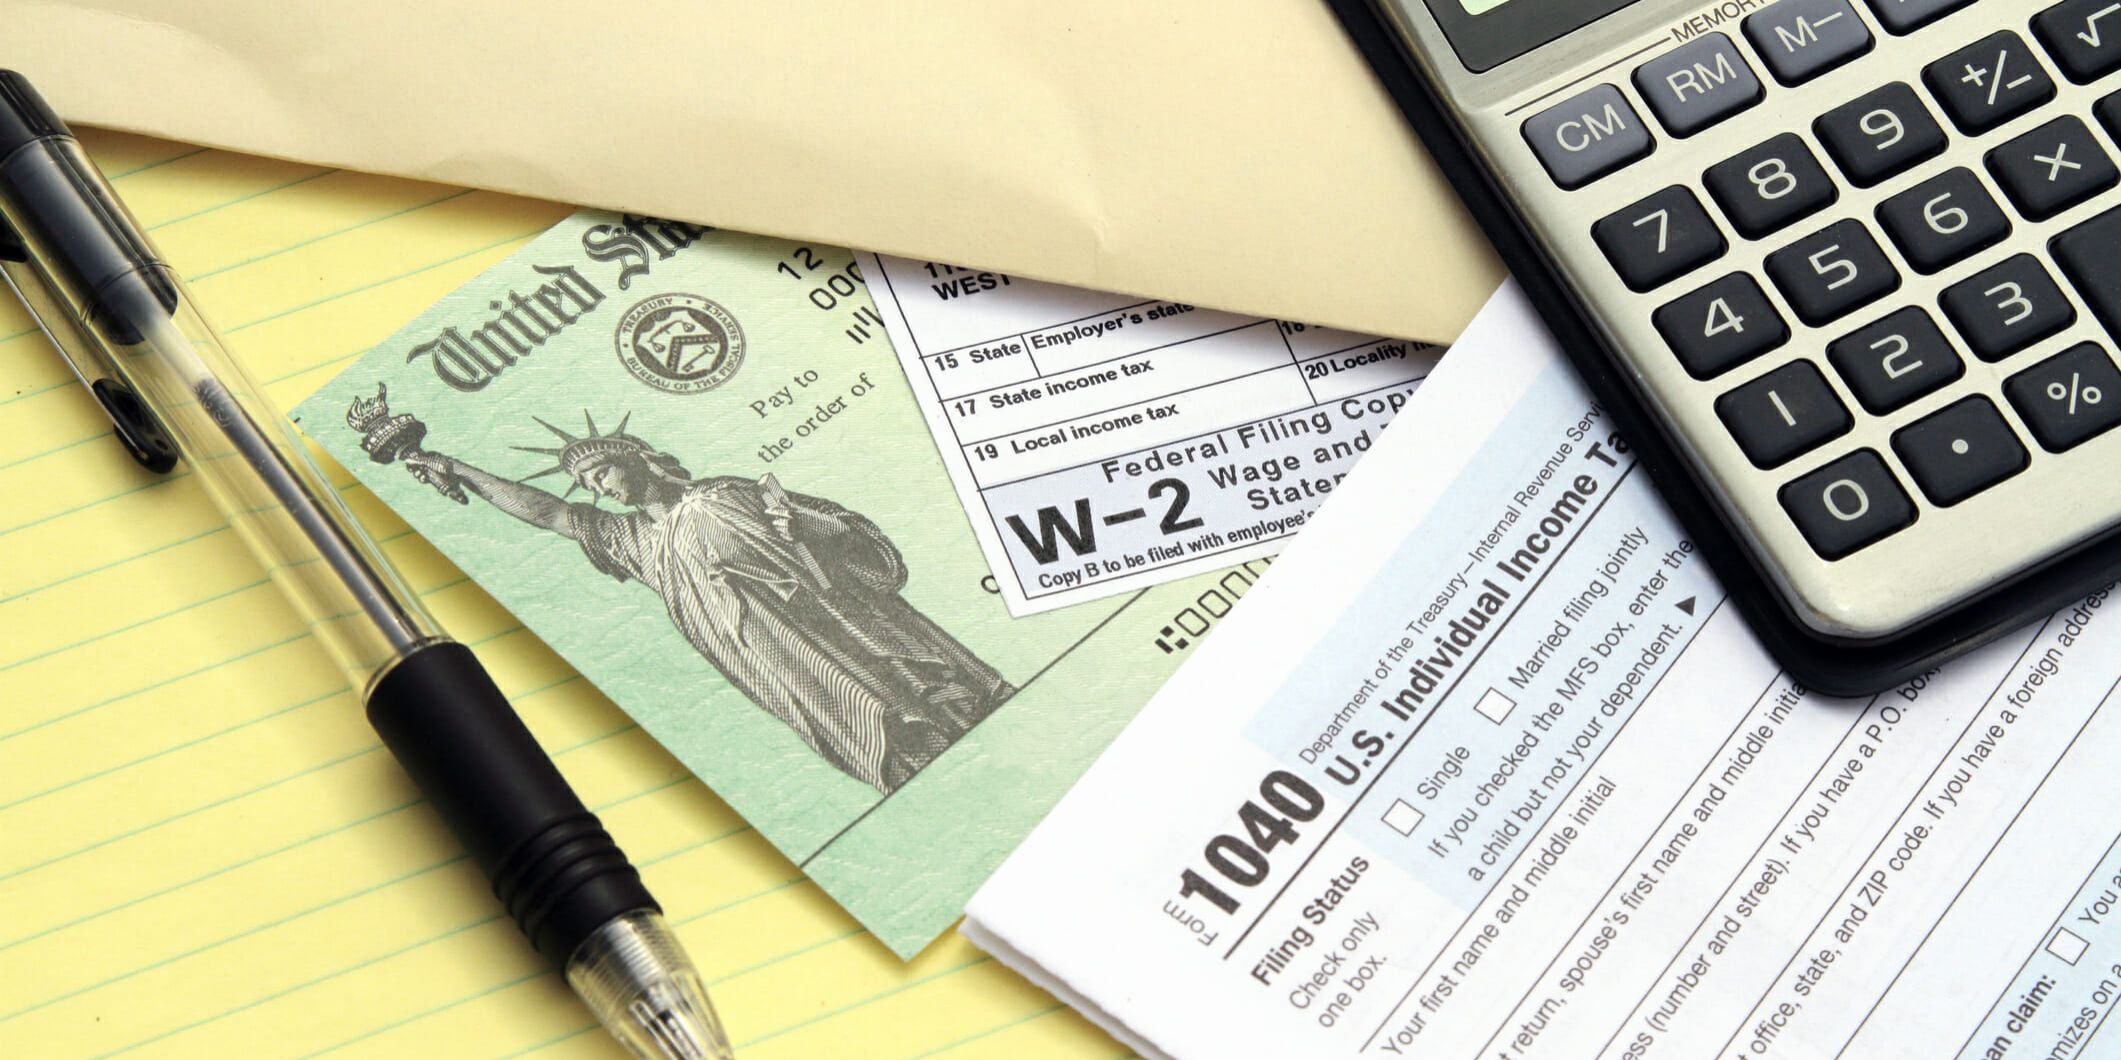 Tax forms with Treasury check. IRS tax forms 1040 and W-2. Tax preparation concept. Treasury check represents a tax refund. Calculator, pen and papers yellow note pad also visible.